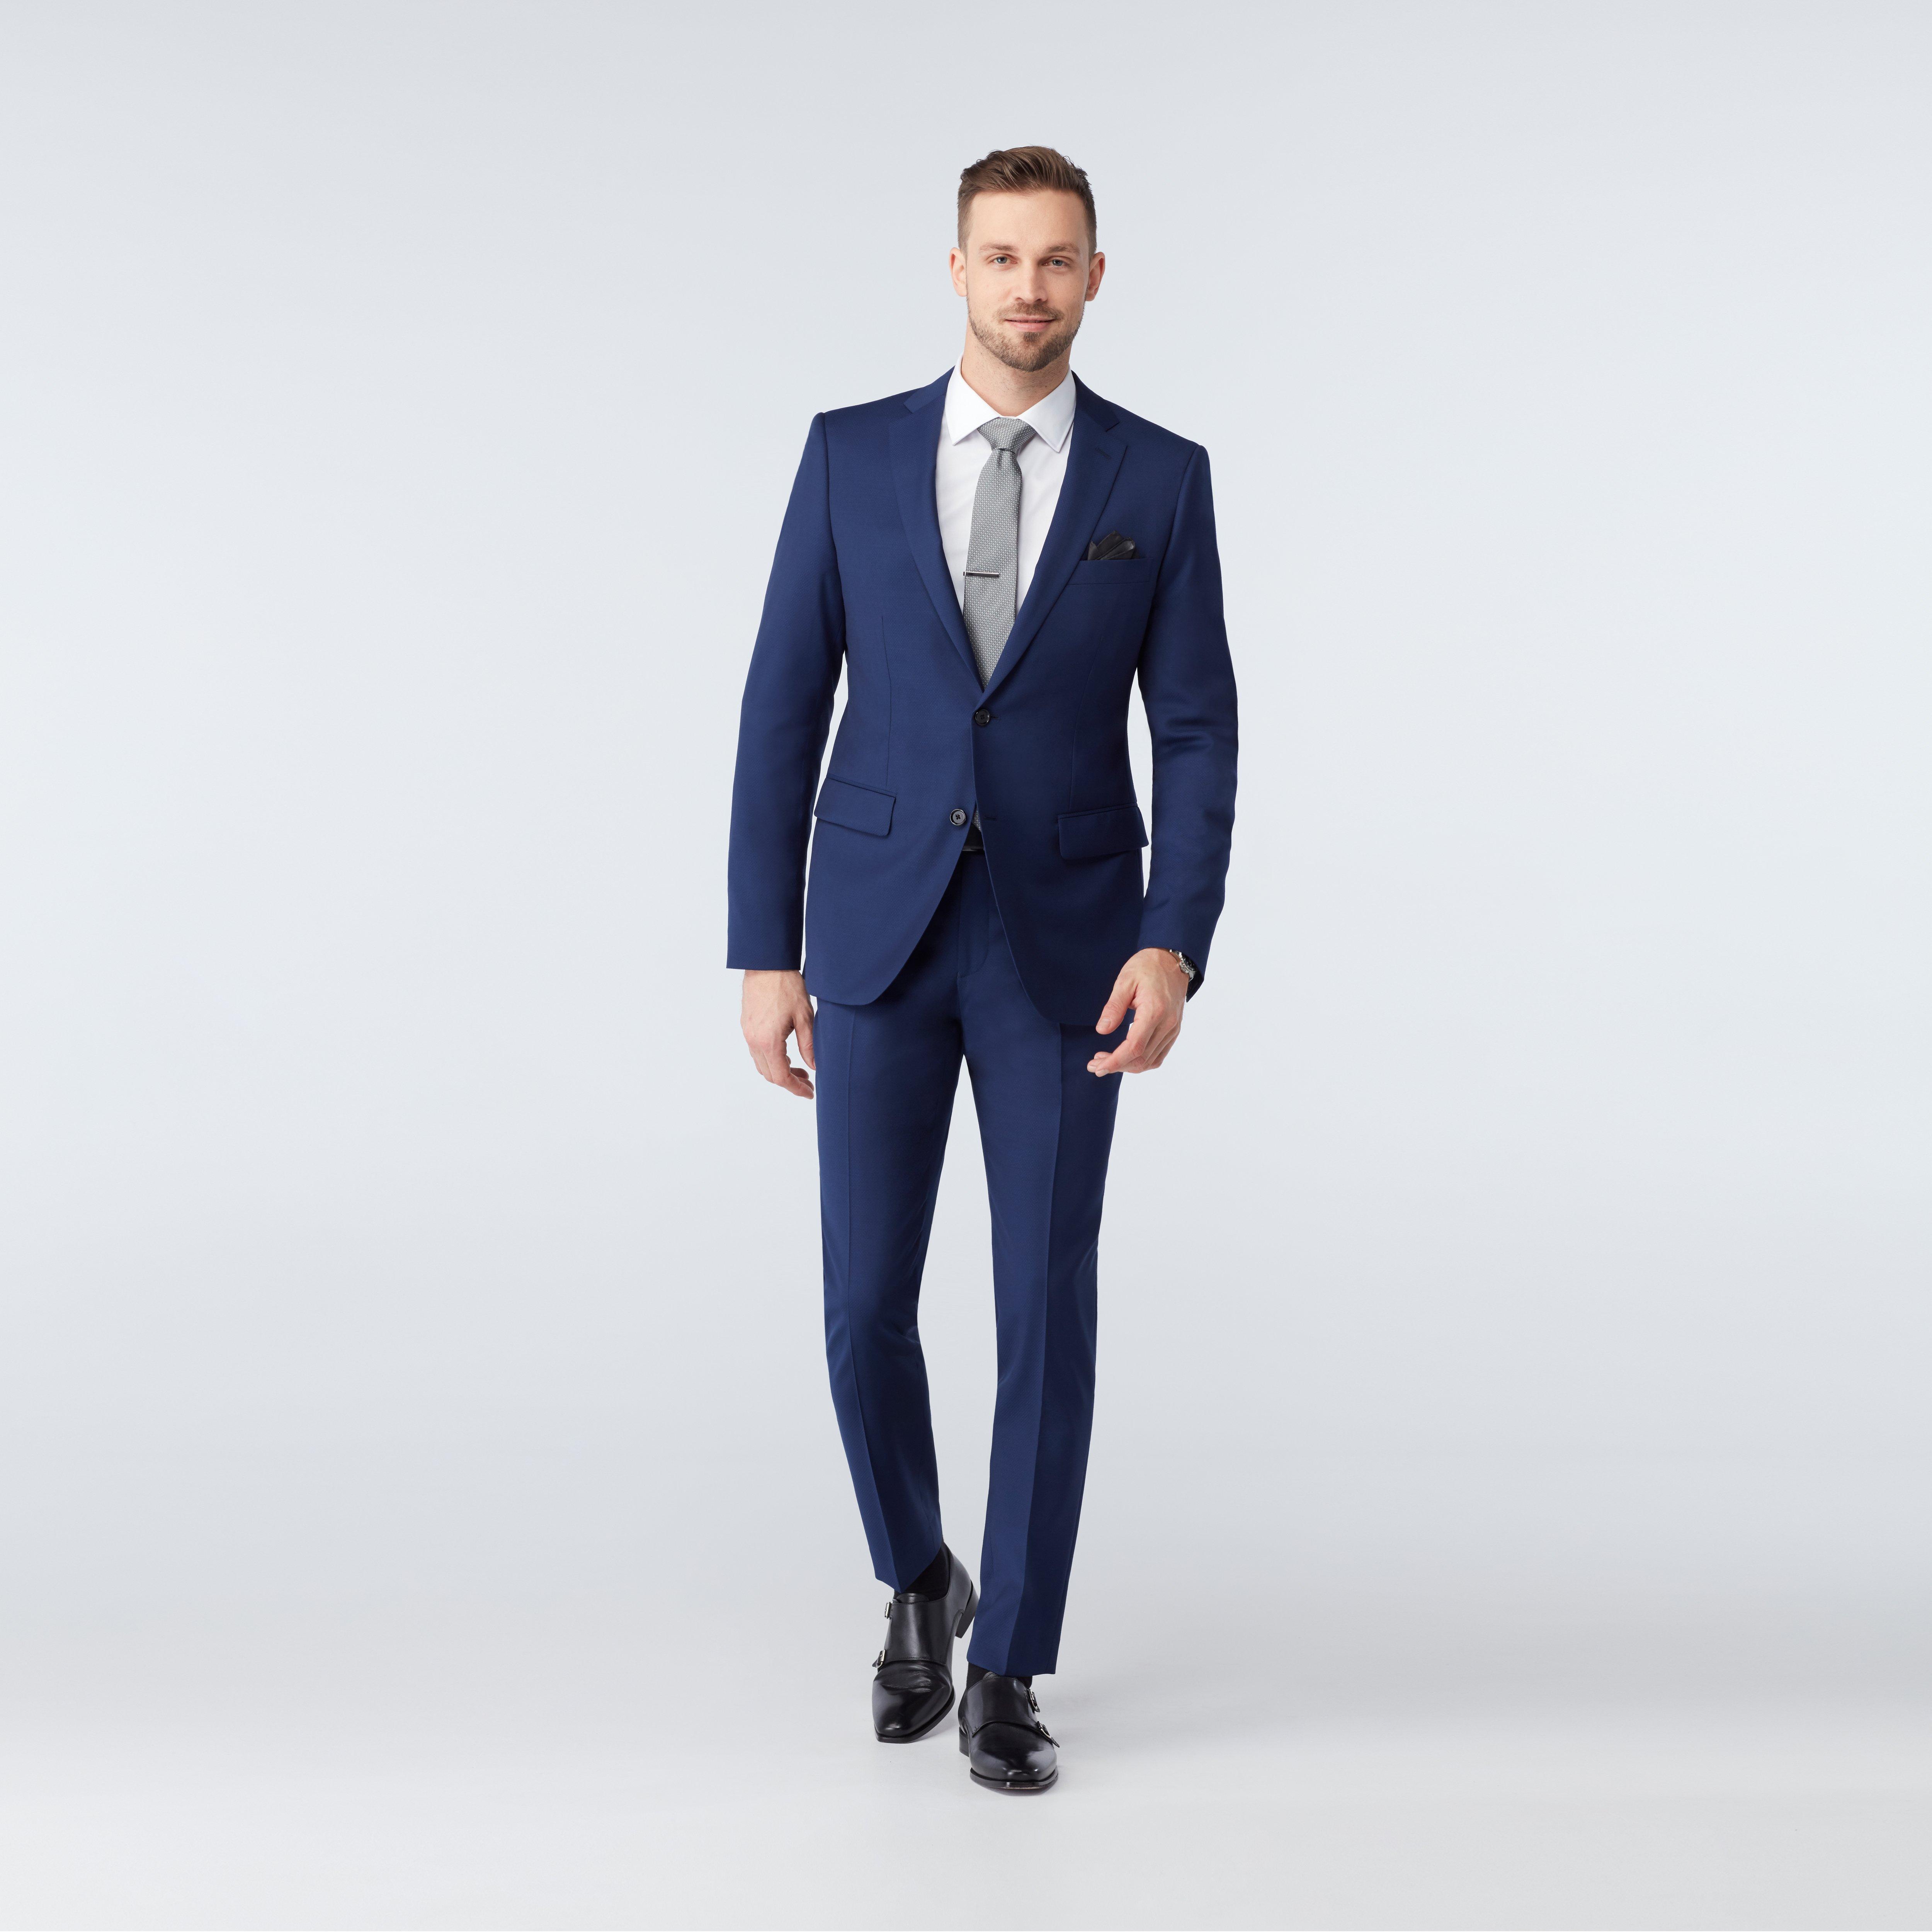 Custom Suits Made For You - Highworth Navy Suit | INDOCHINO